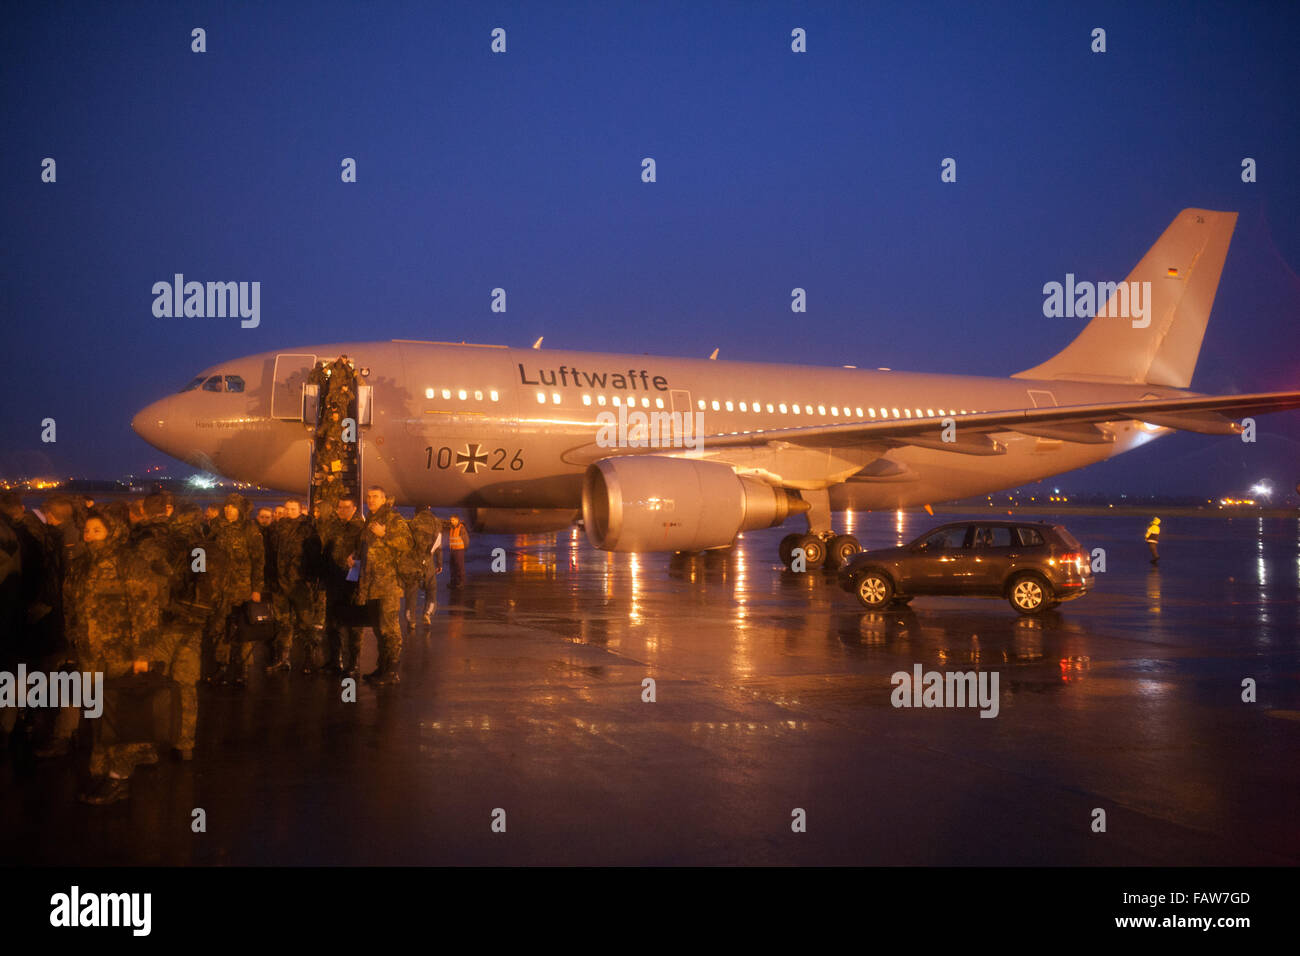 HANDOUT - A handout picture made available by the Bundeswehr (German armed forces) on 05 January 2016 shows the arrival of German soldiers in an Airbus A310 as part of the operation Inherent Resolve, at Incirlik airbase, Turkey, 04 January 2016. Photo: BUNDESWEHR/FALK BAERWALD/dpa (ATTENTION EDITORS: FOR EDITORIAL USE ONLY IN CONNECTION WITH CURRENT REPORTING/ MANDATORY CREDIT: 'BUNDESWEHR/FALK BAERWALD/dpa') Stock Photo